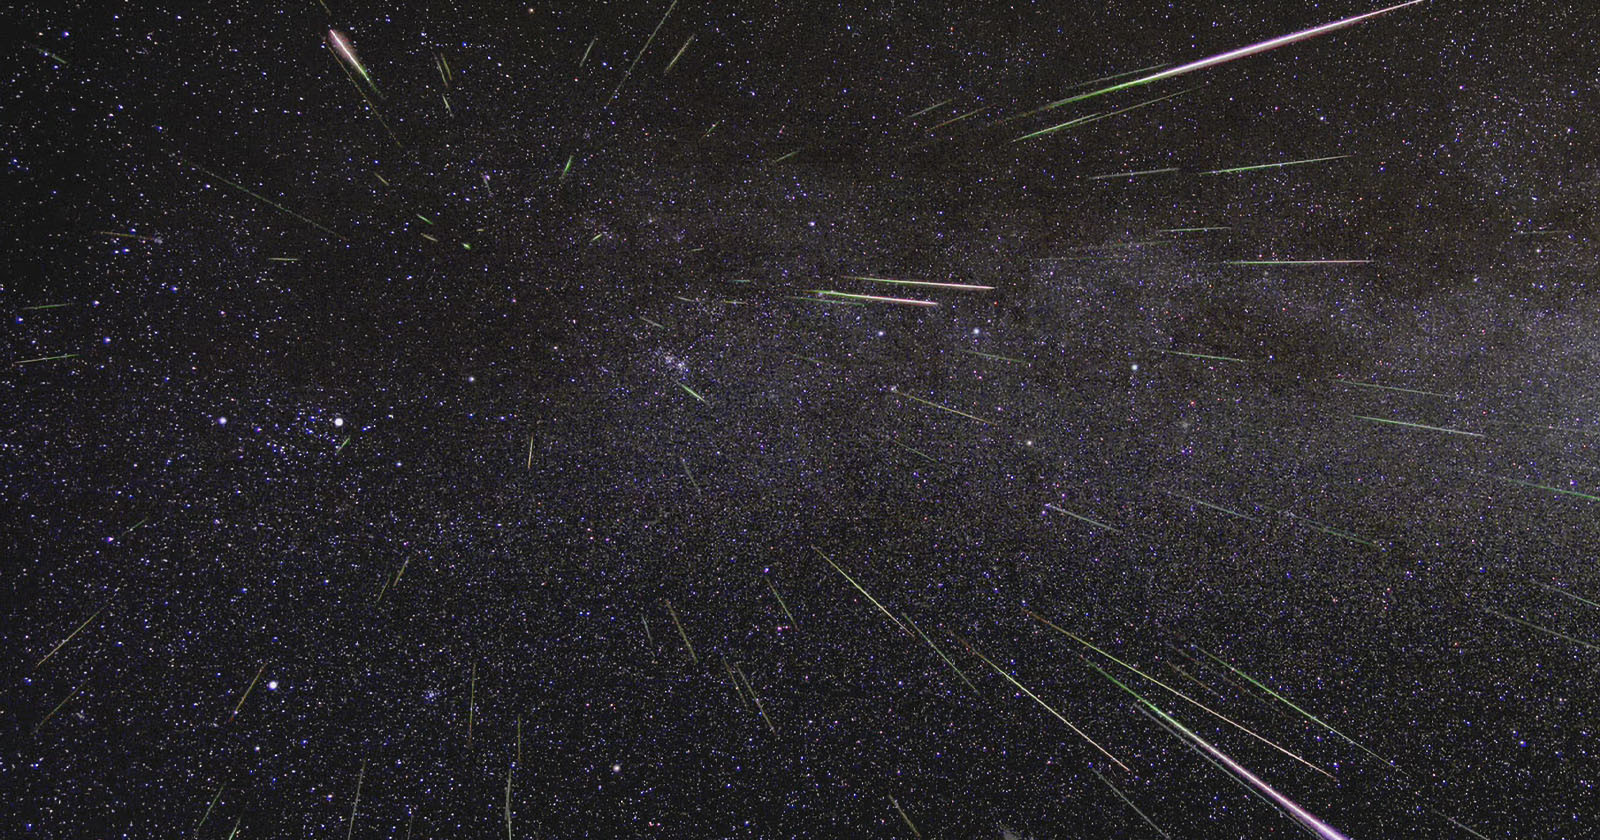 What You Need To Know About Tonights Perseid Meteor Shower Peak